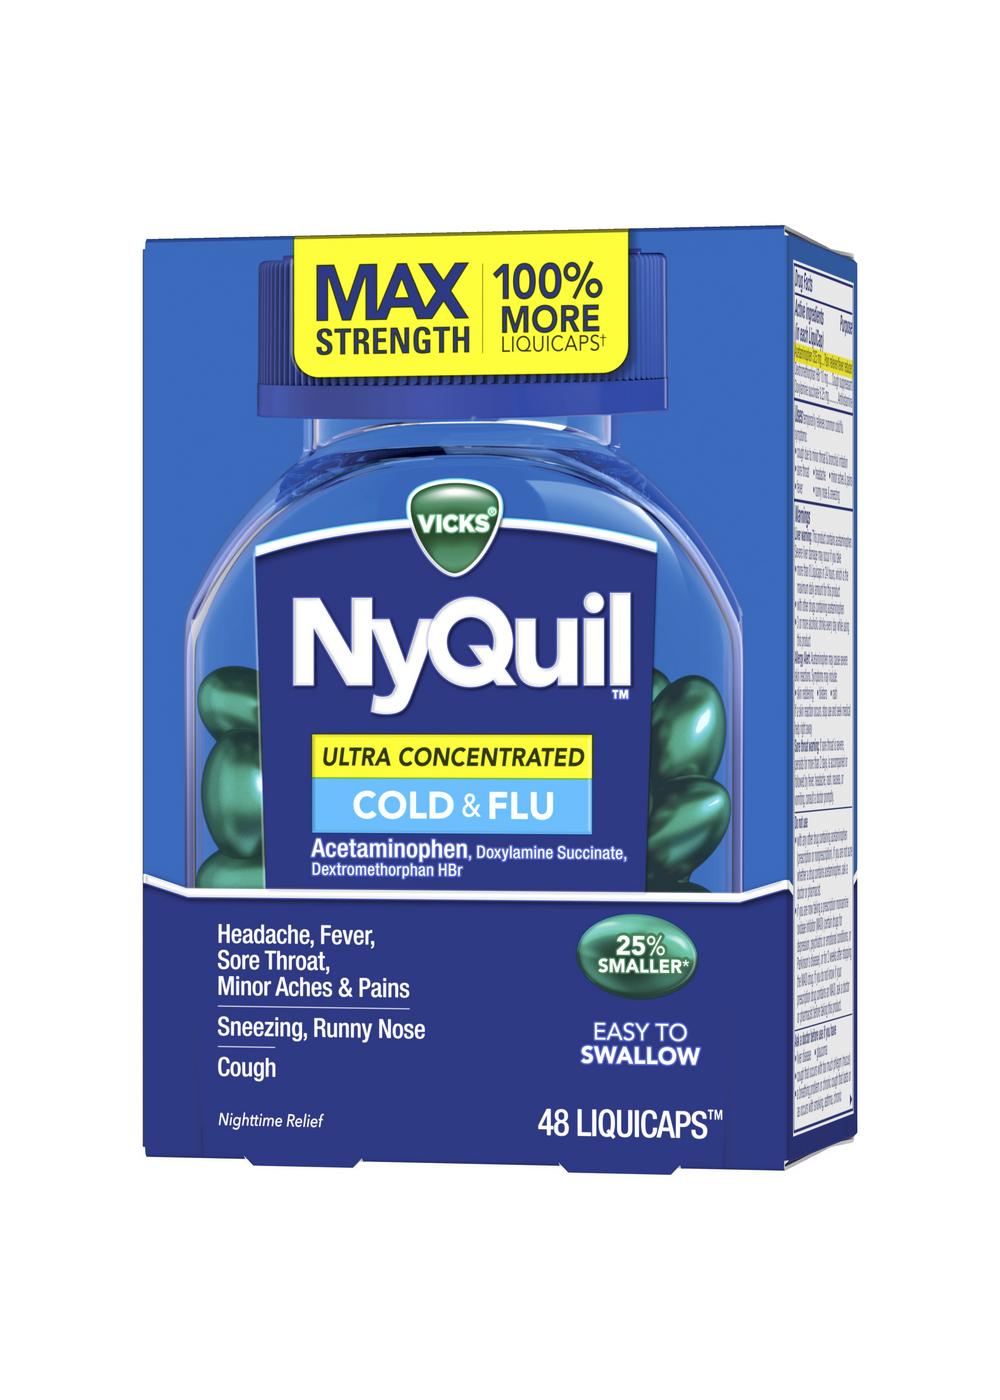 Vicks NyQuil Cold &Flu Liquicaps; image 2 of 6